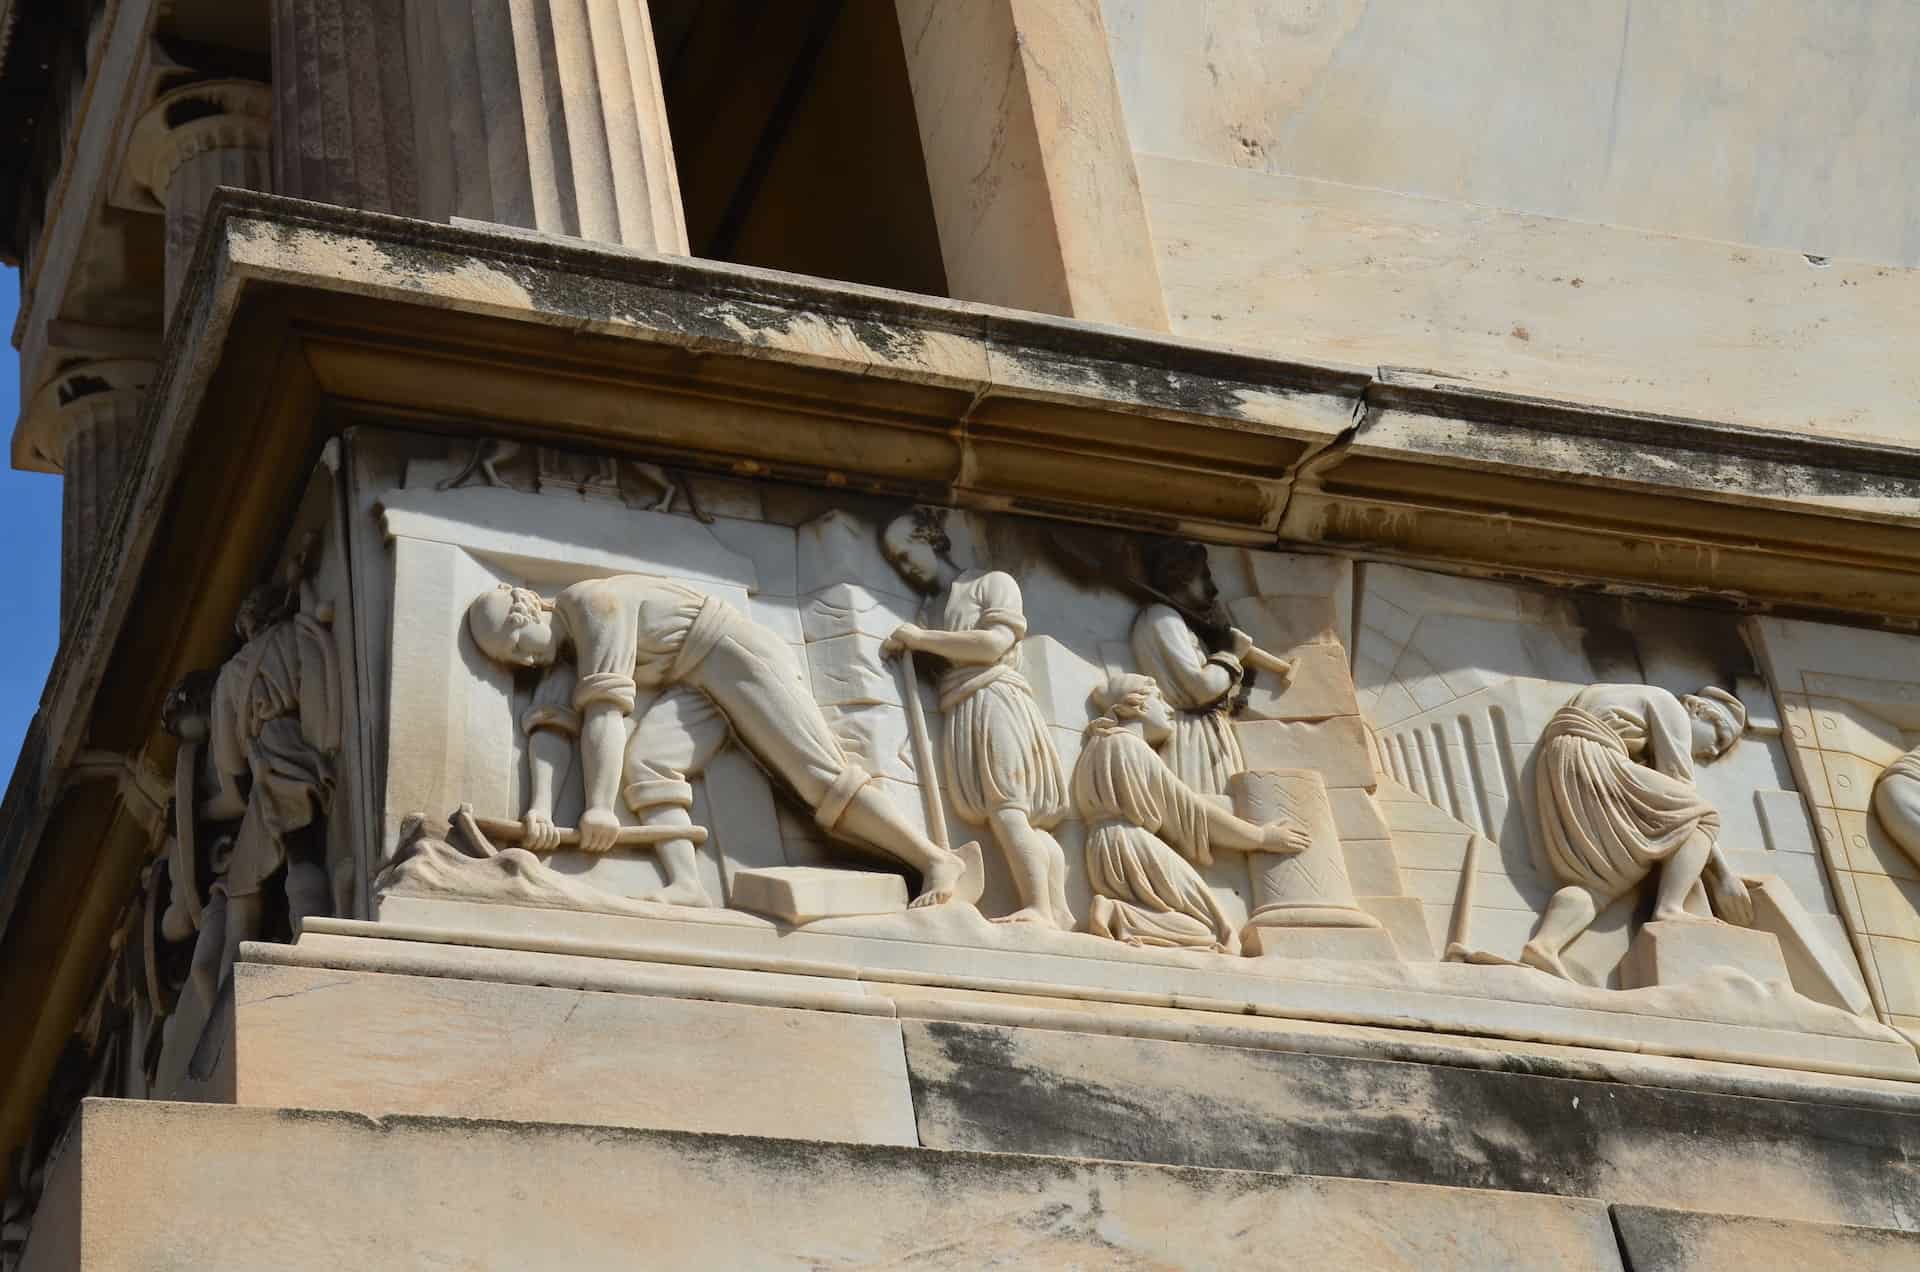 Frieze on the tomb of Heinrich Schliemann at the First Cemetery of Athens, Greece